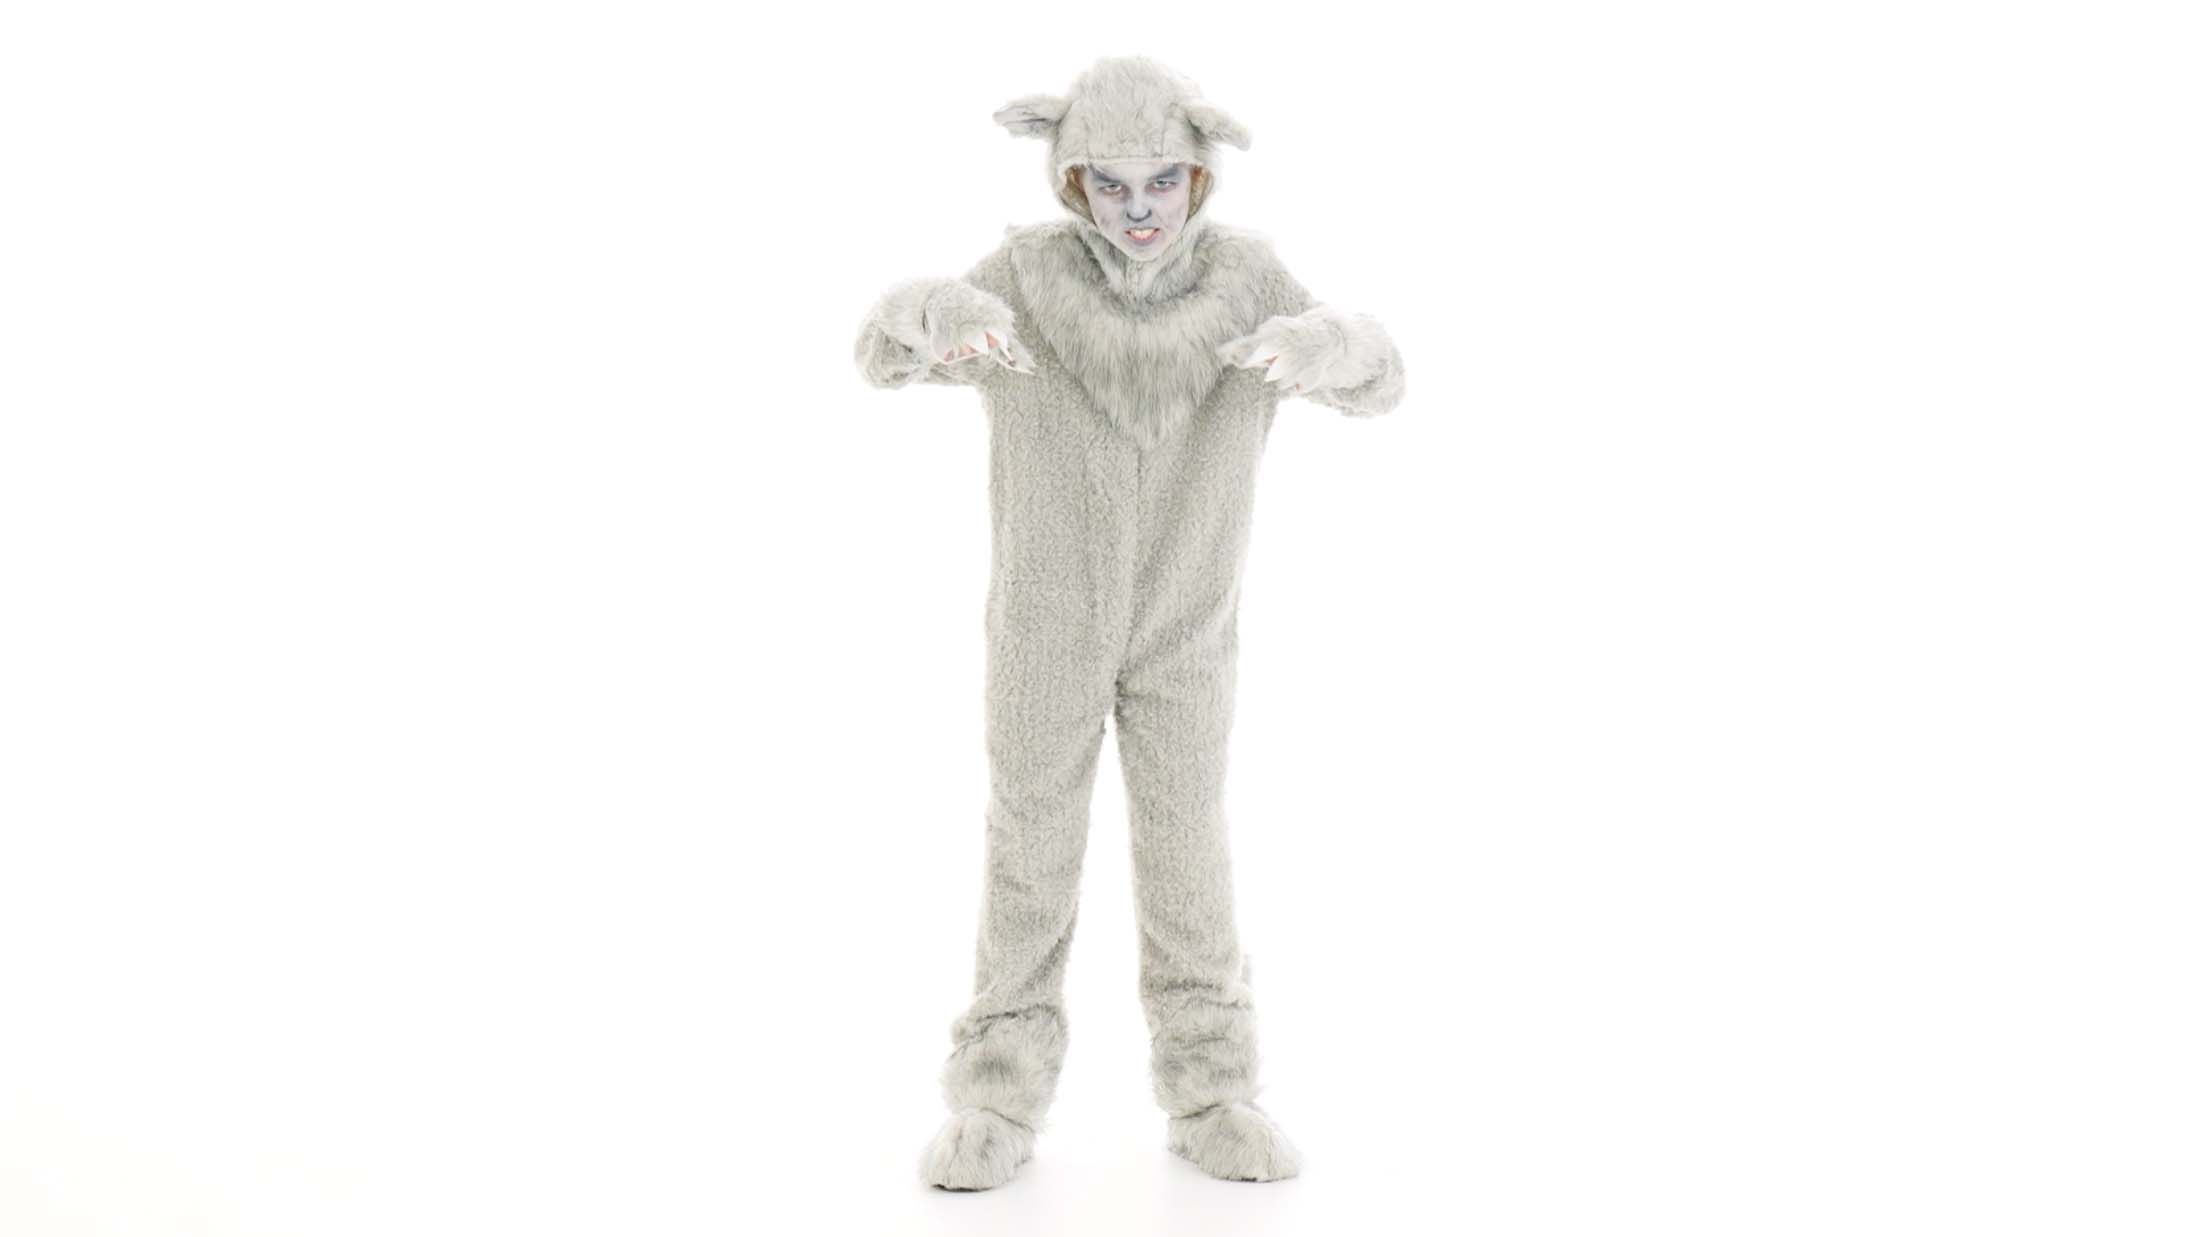 Perfect for Halloween or school plays, this kids wolf costume is a complete package and great value.  The jumpsuit also includes headpiece, foot covers and attached mitts. You will be howling at the moon in no time at all.